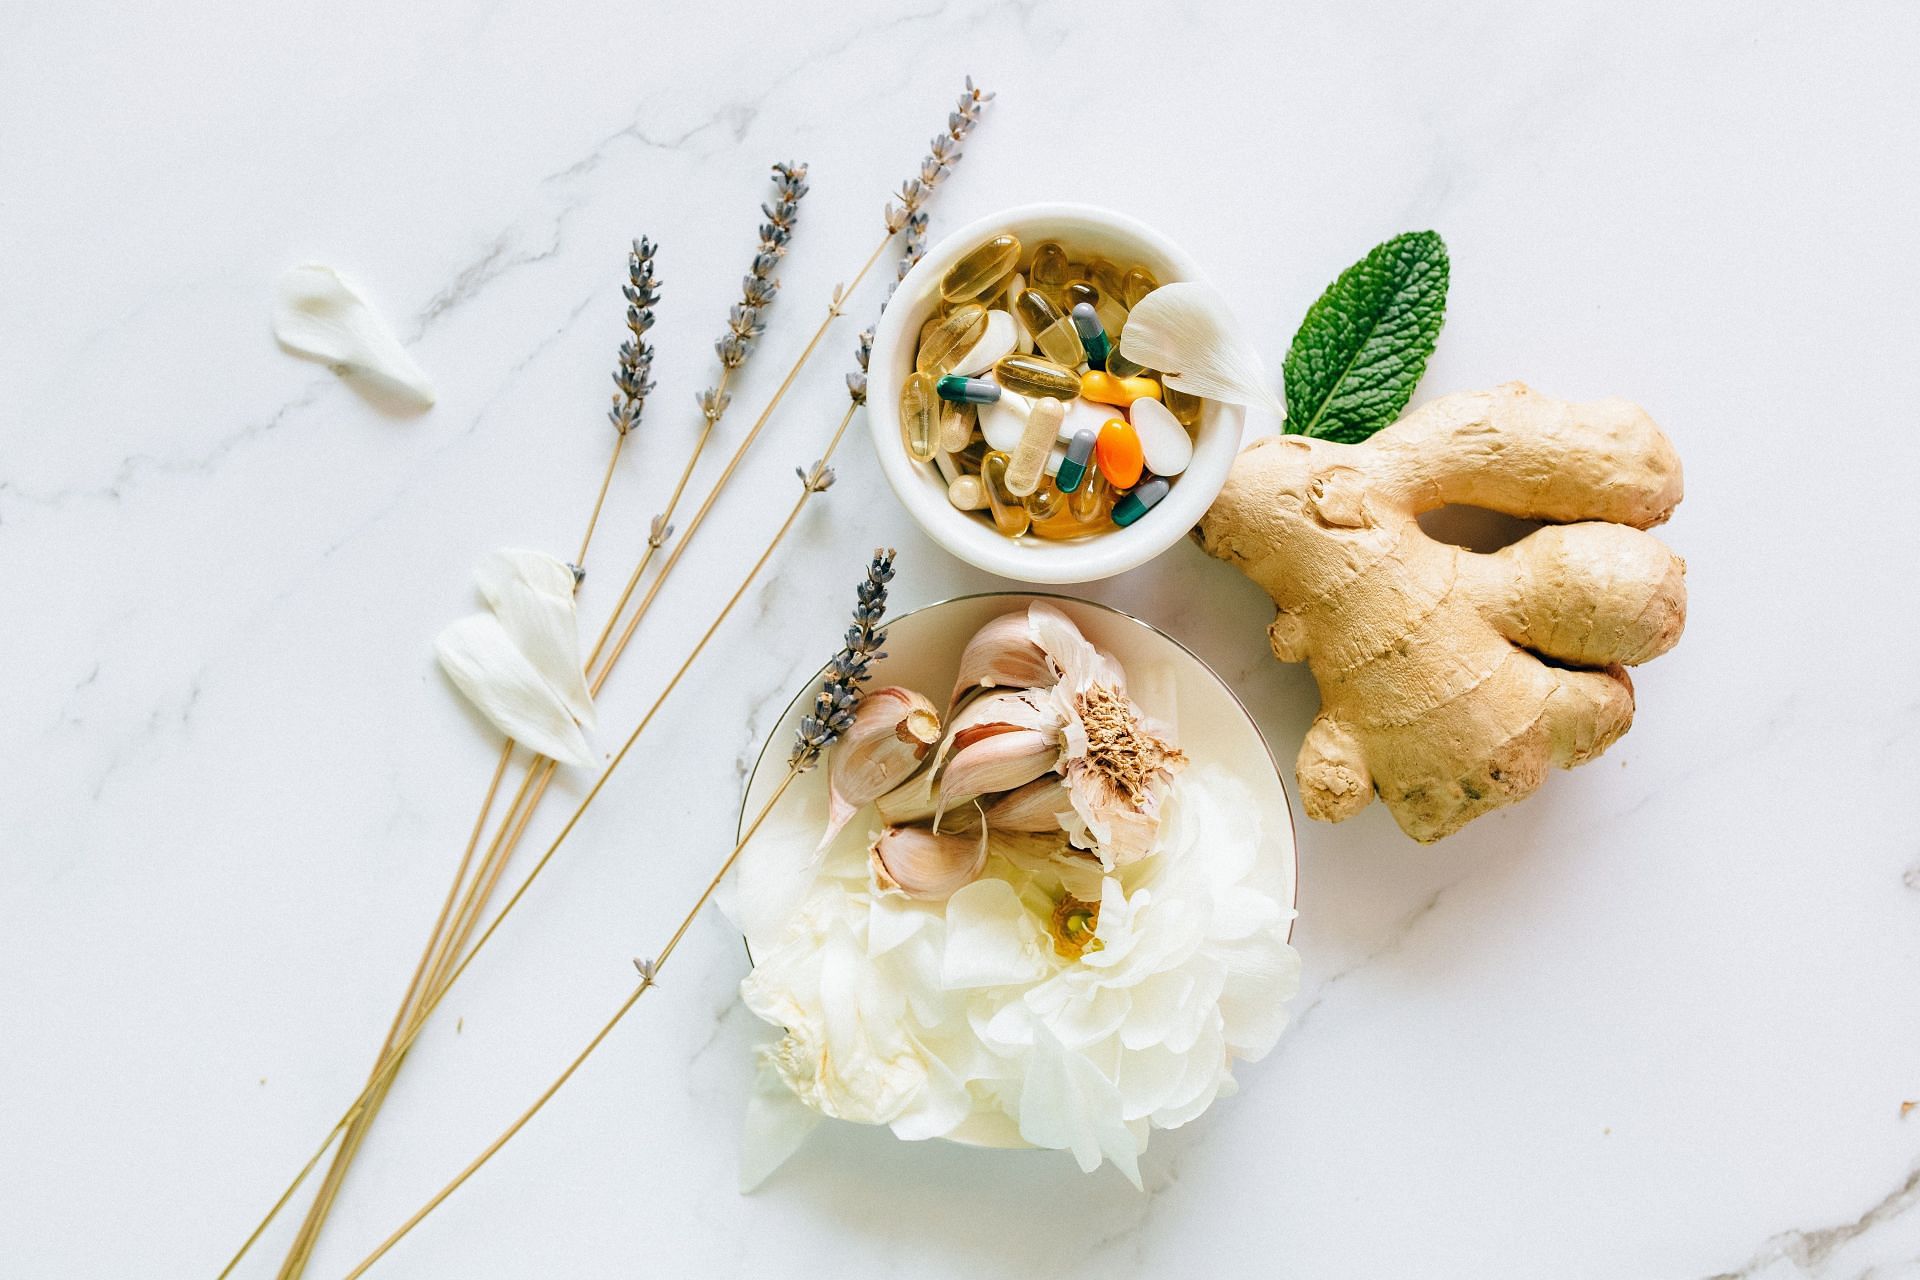  Learn the mighty medicinal properties and nutrition facts of ginger. (Image via Pexels/Nataliya Vaitkevich)